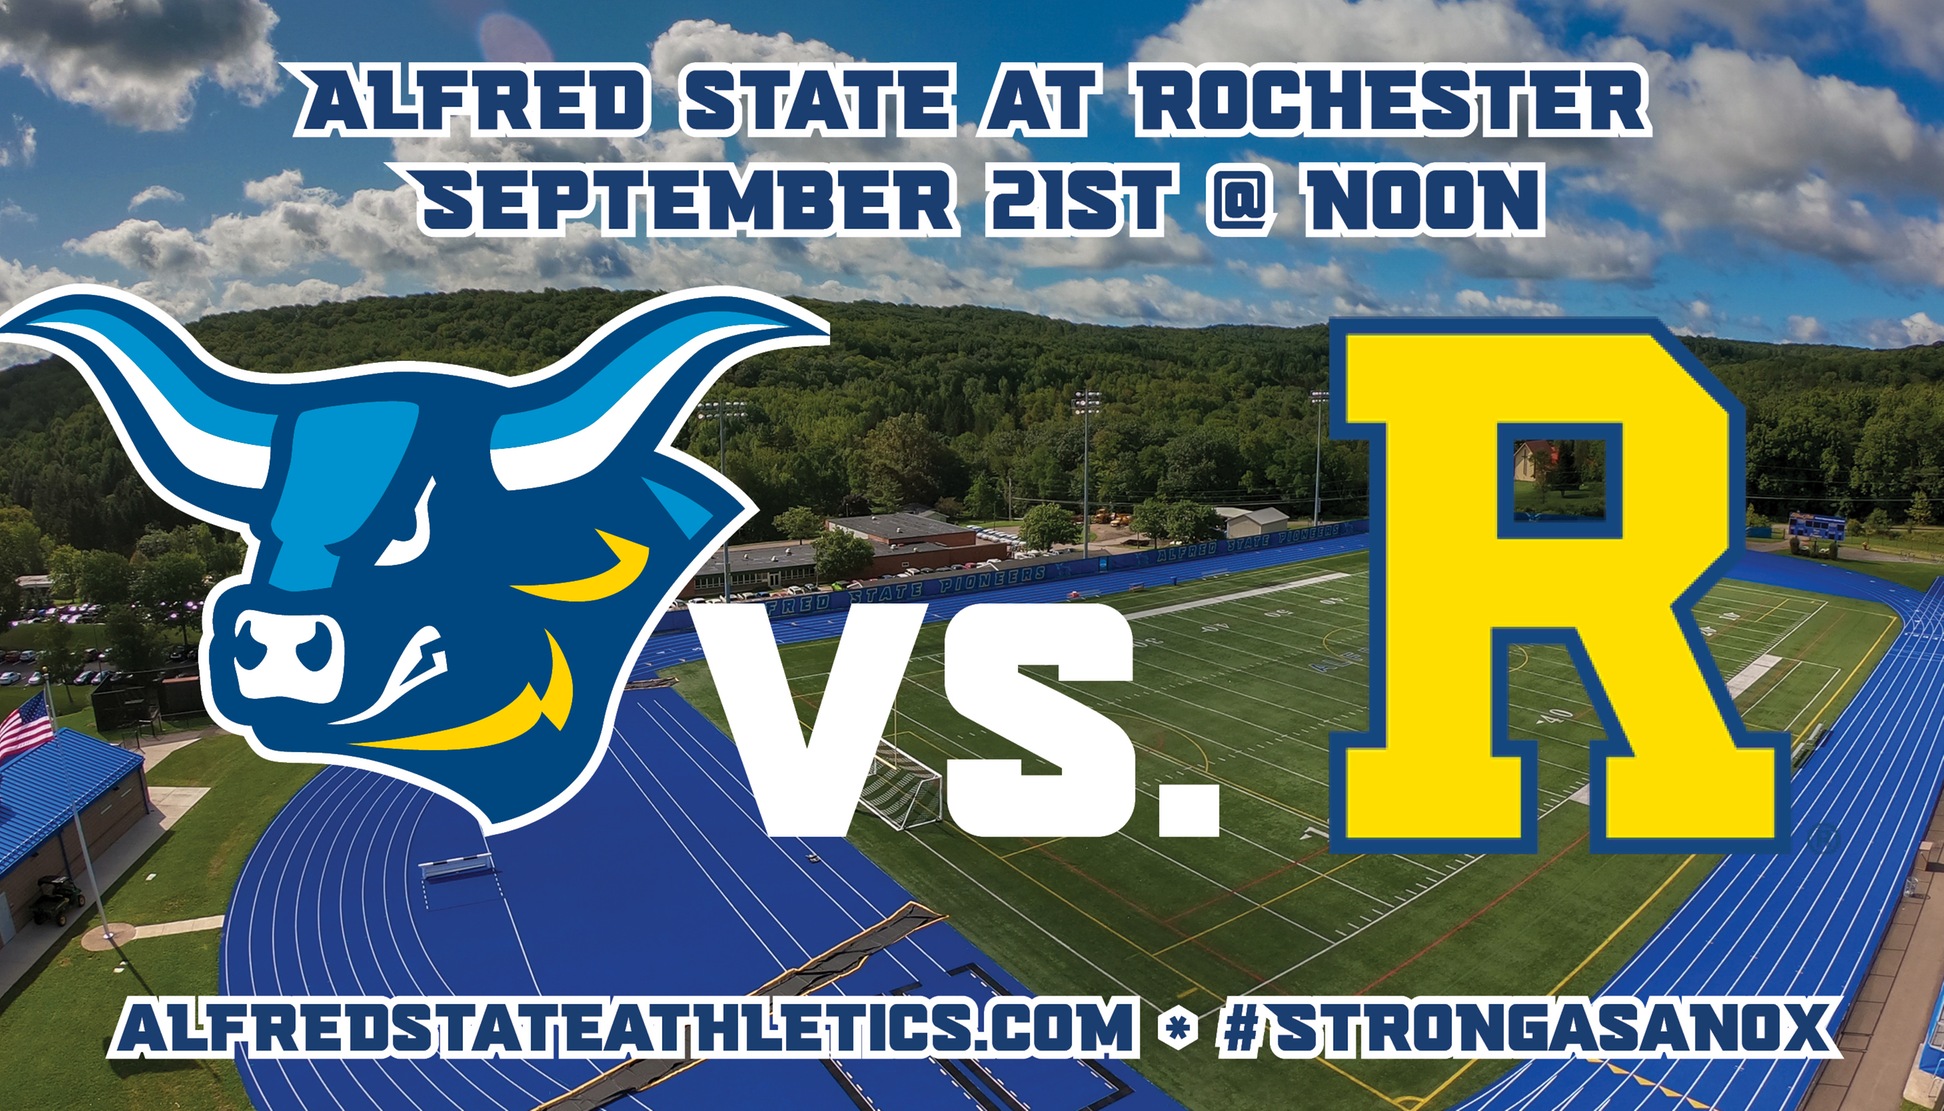 Alfred State travels to the University of Rochester on Saturday for a battle with the Yellowjackets